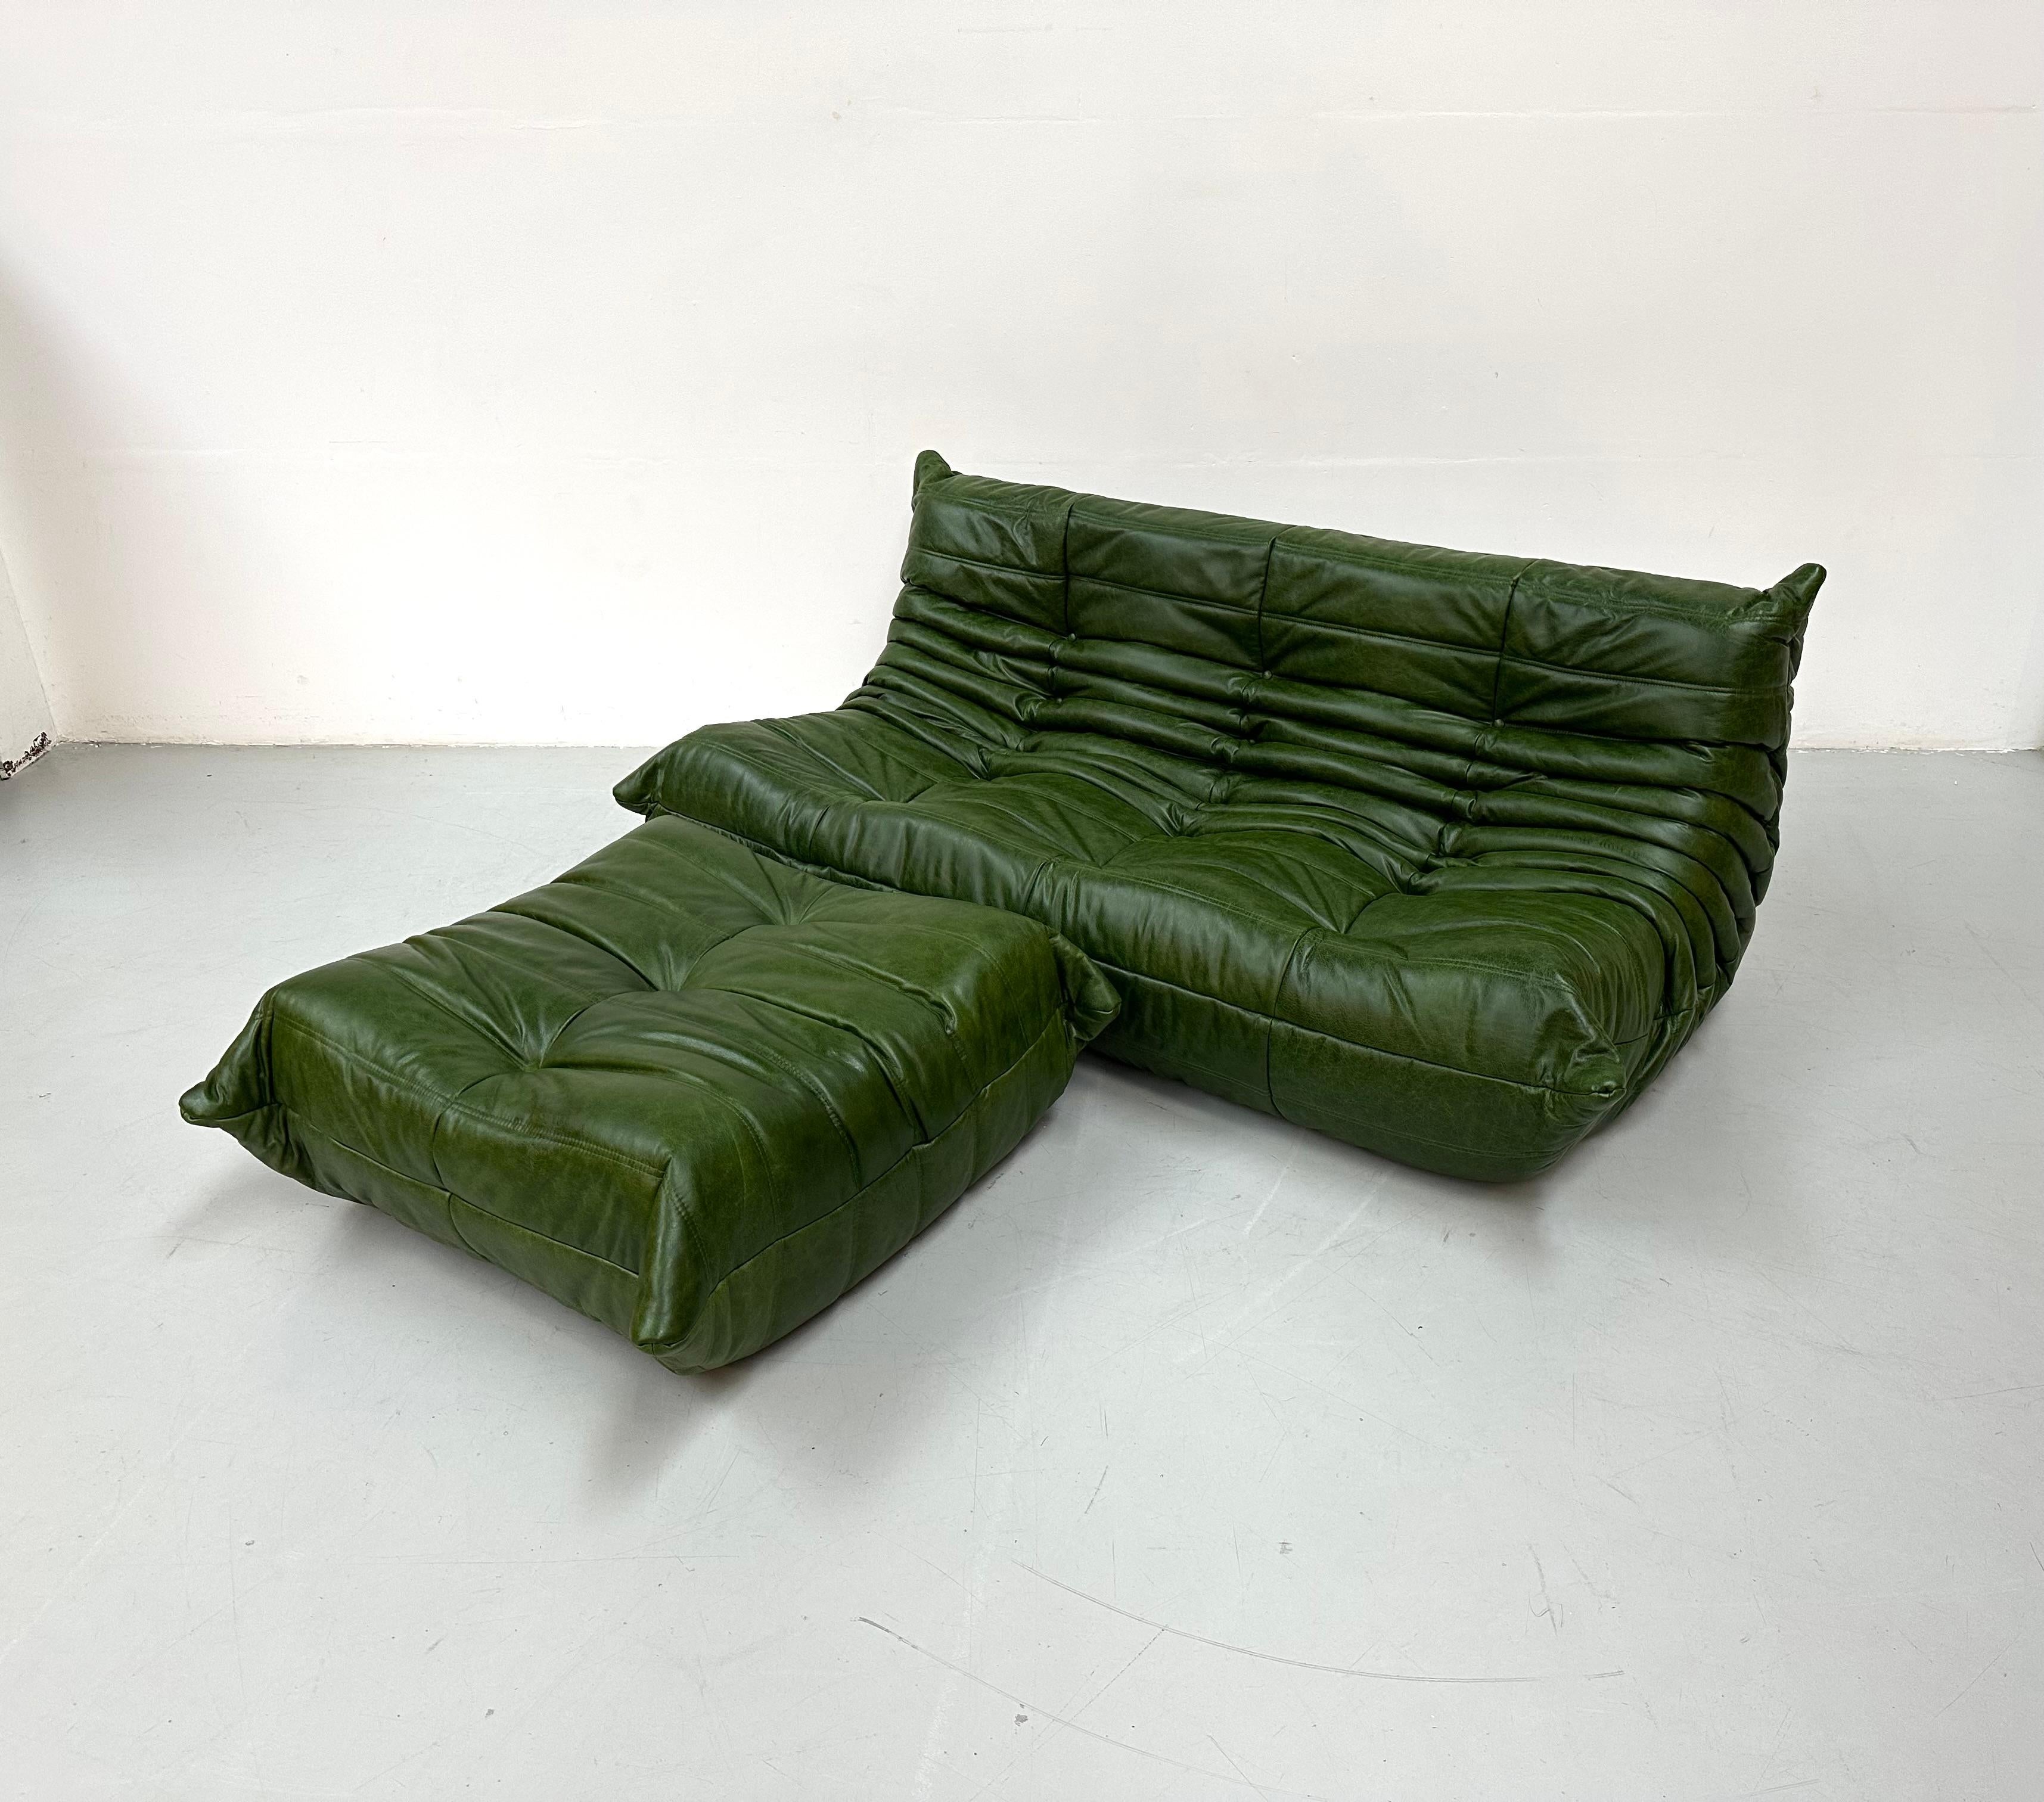 French Togo Sofa with Ottoman in Green Leather by M.Ducaroy for Ligne Roset. 1